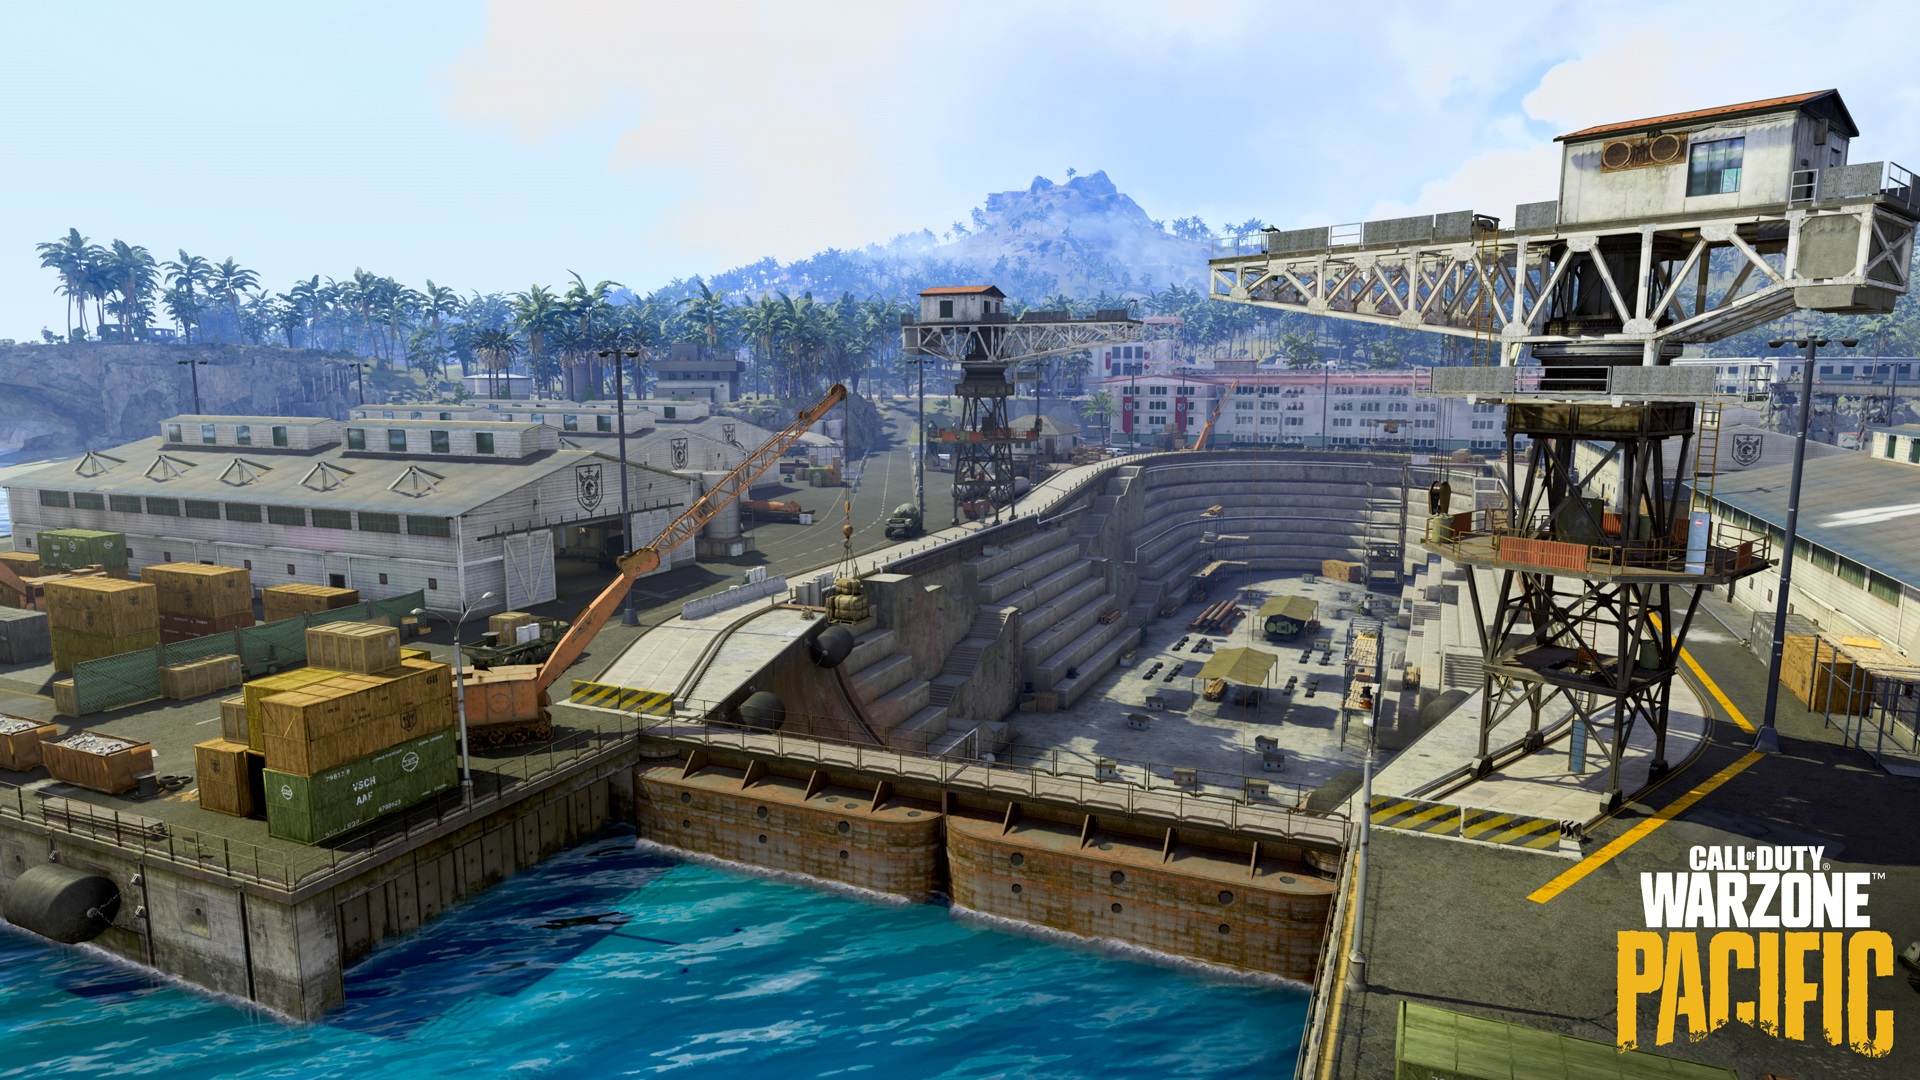 Warzone Pacific Map The 15 districts of Caldera have been detailed